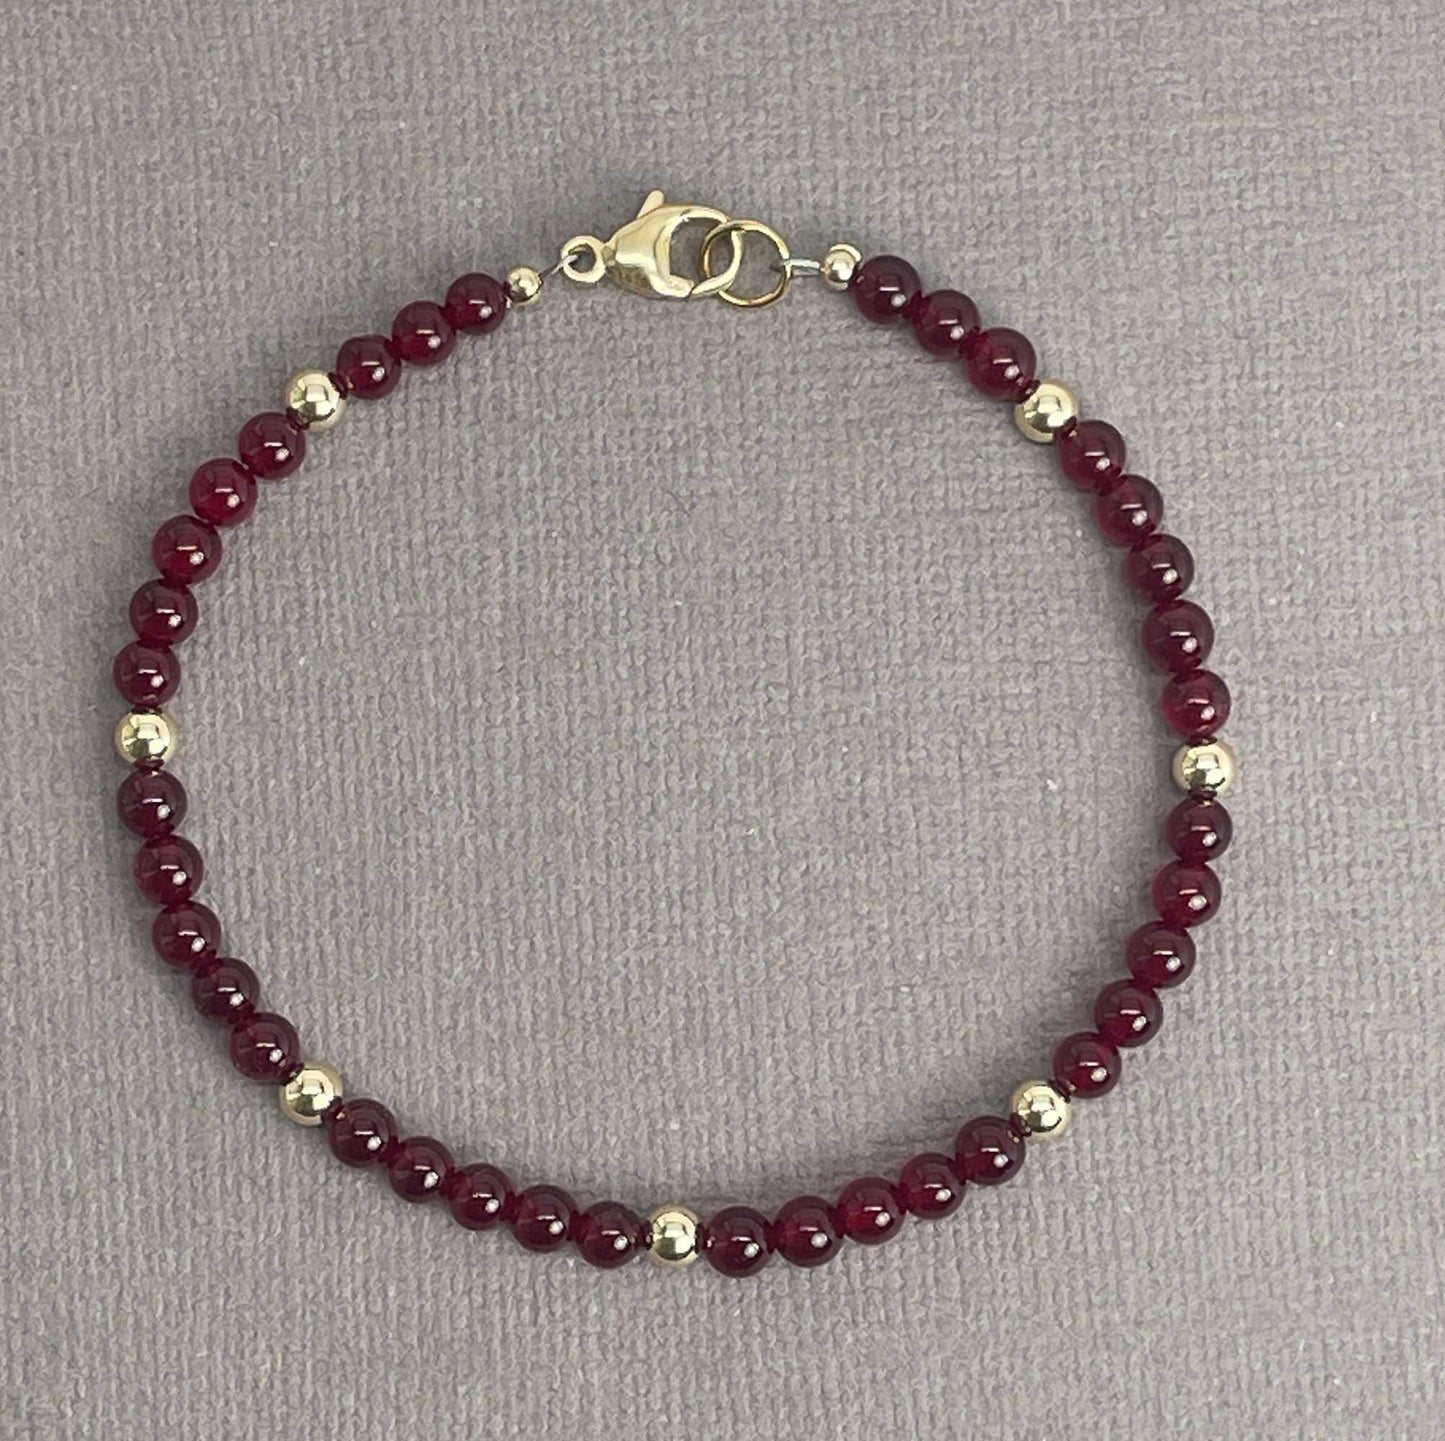 Red Jade and Gold Filled Bead Bracelet